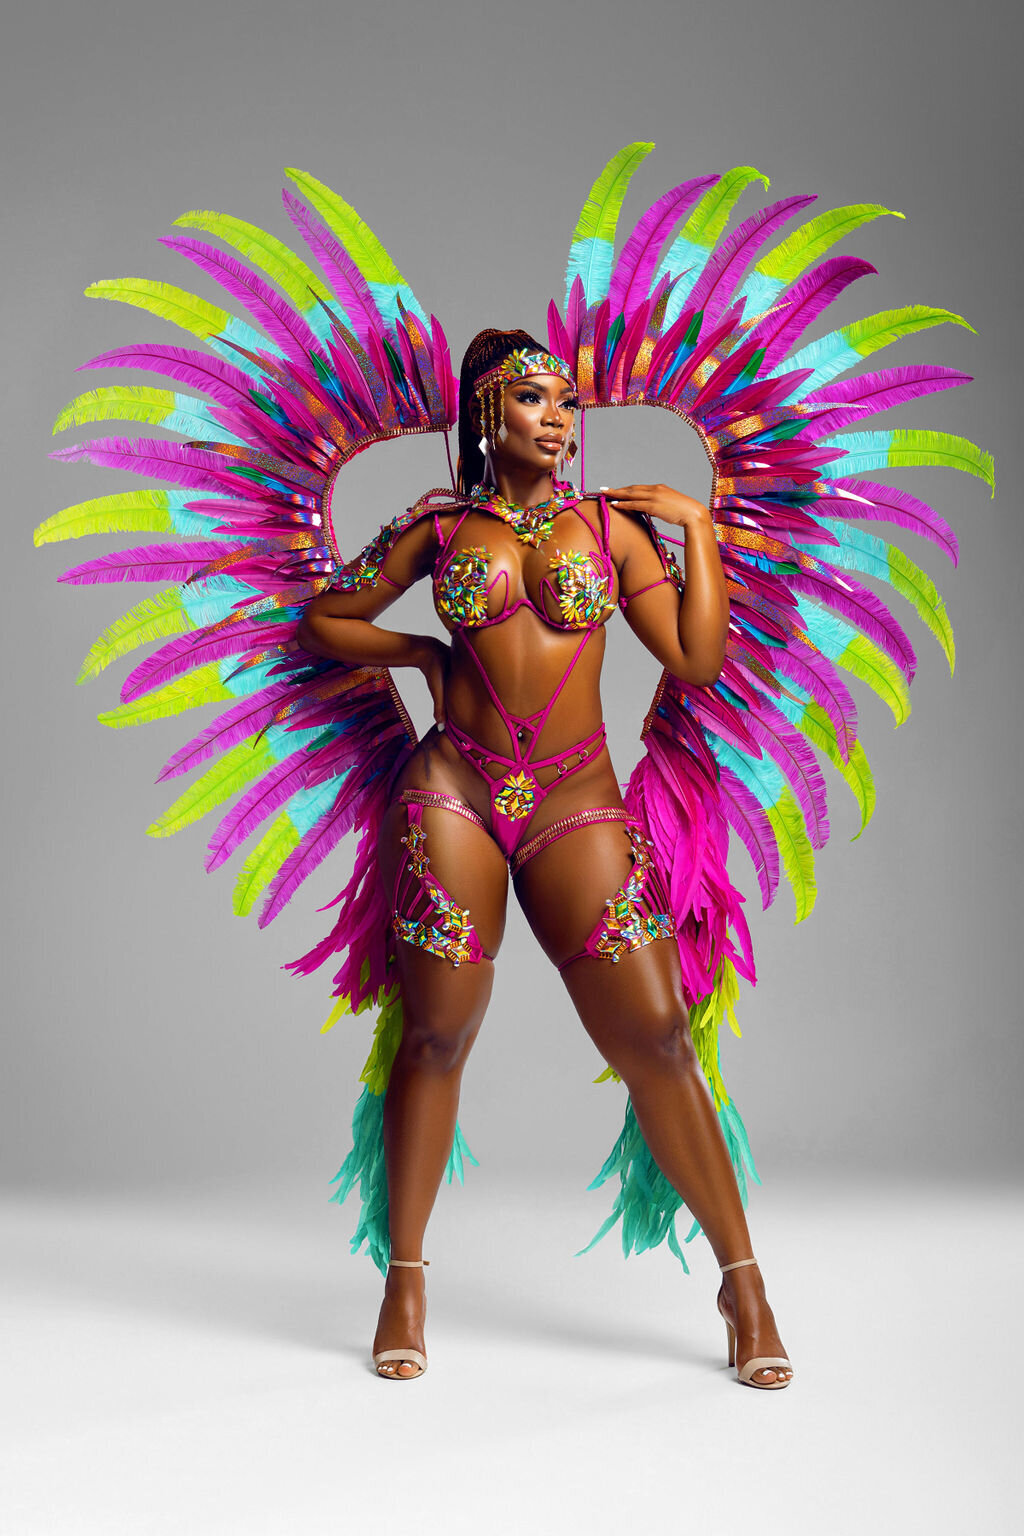 Costume for Caribana Toronto. Register to play mas with Sunlime Mas